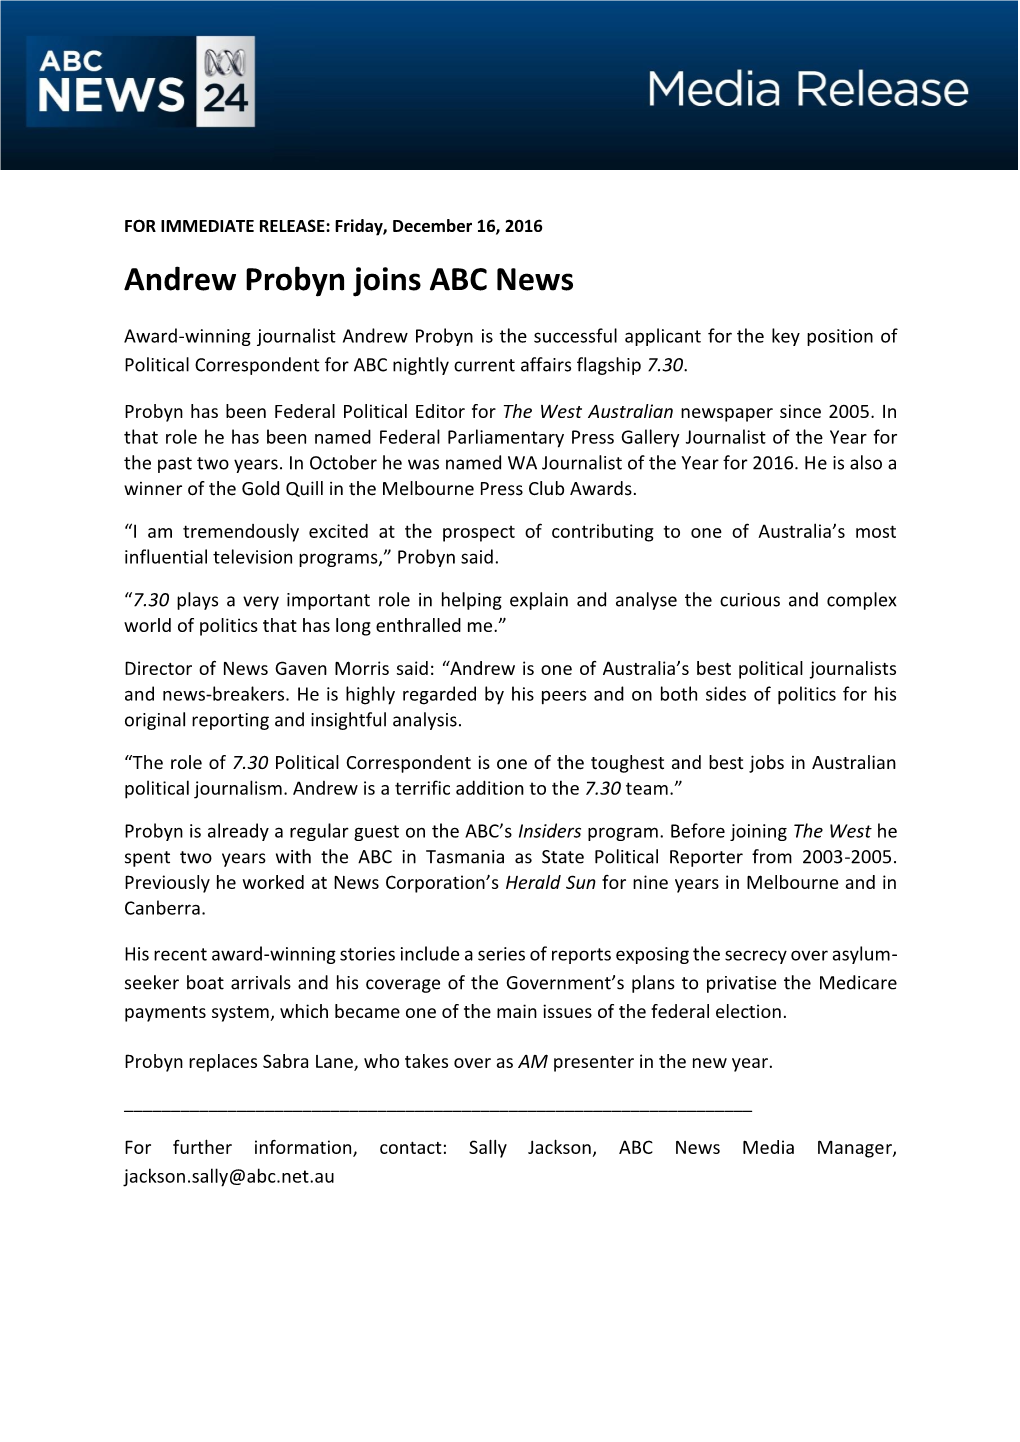 Andrew Probyn Joins ABC News